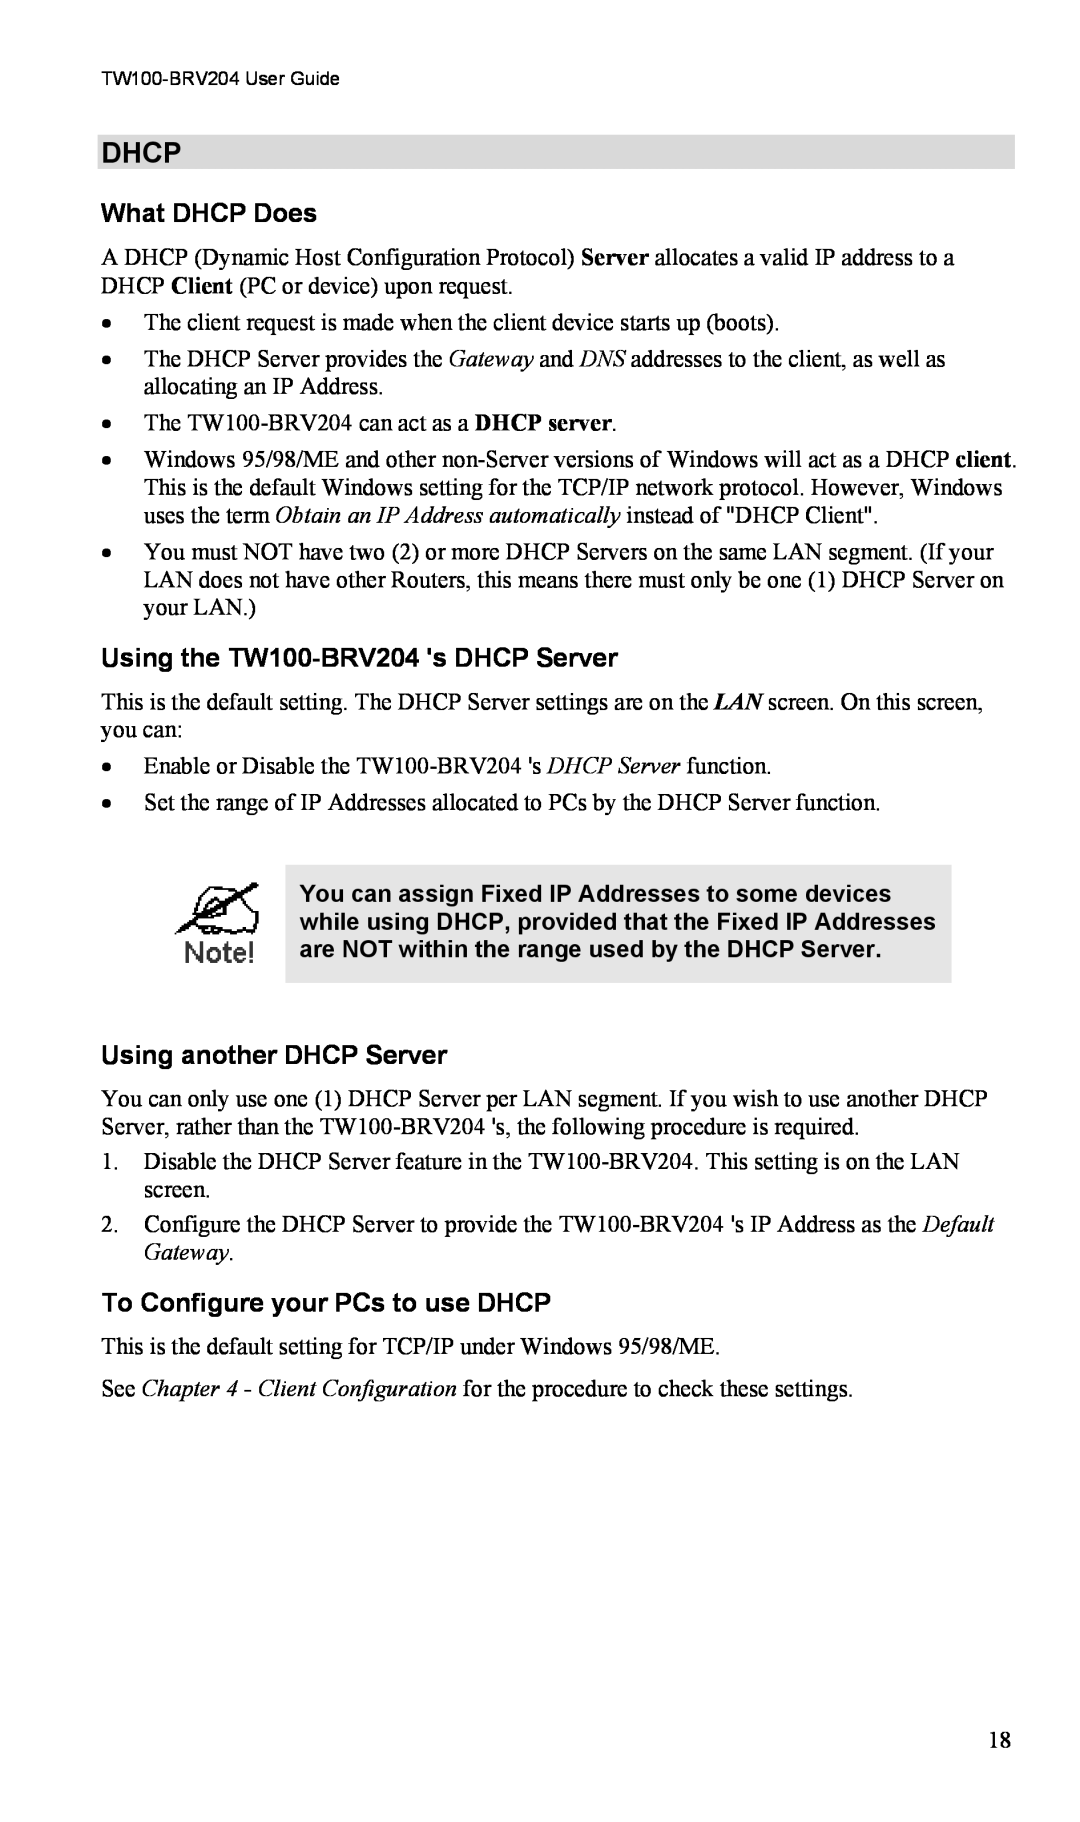 TRENDnet VPN Firewall Router manual Dhcp, What DHCP Does, Using the TW100-BRV204 s DHCP Server, Using another DHCP Server 